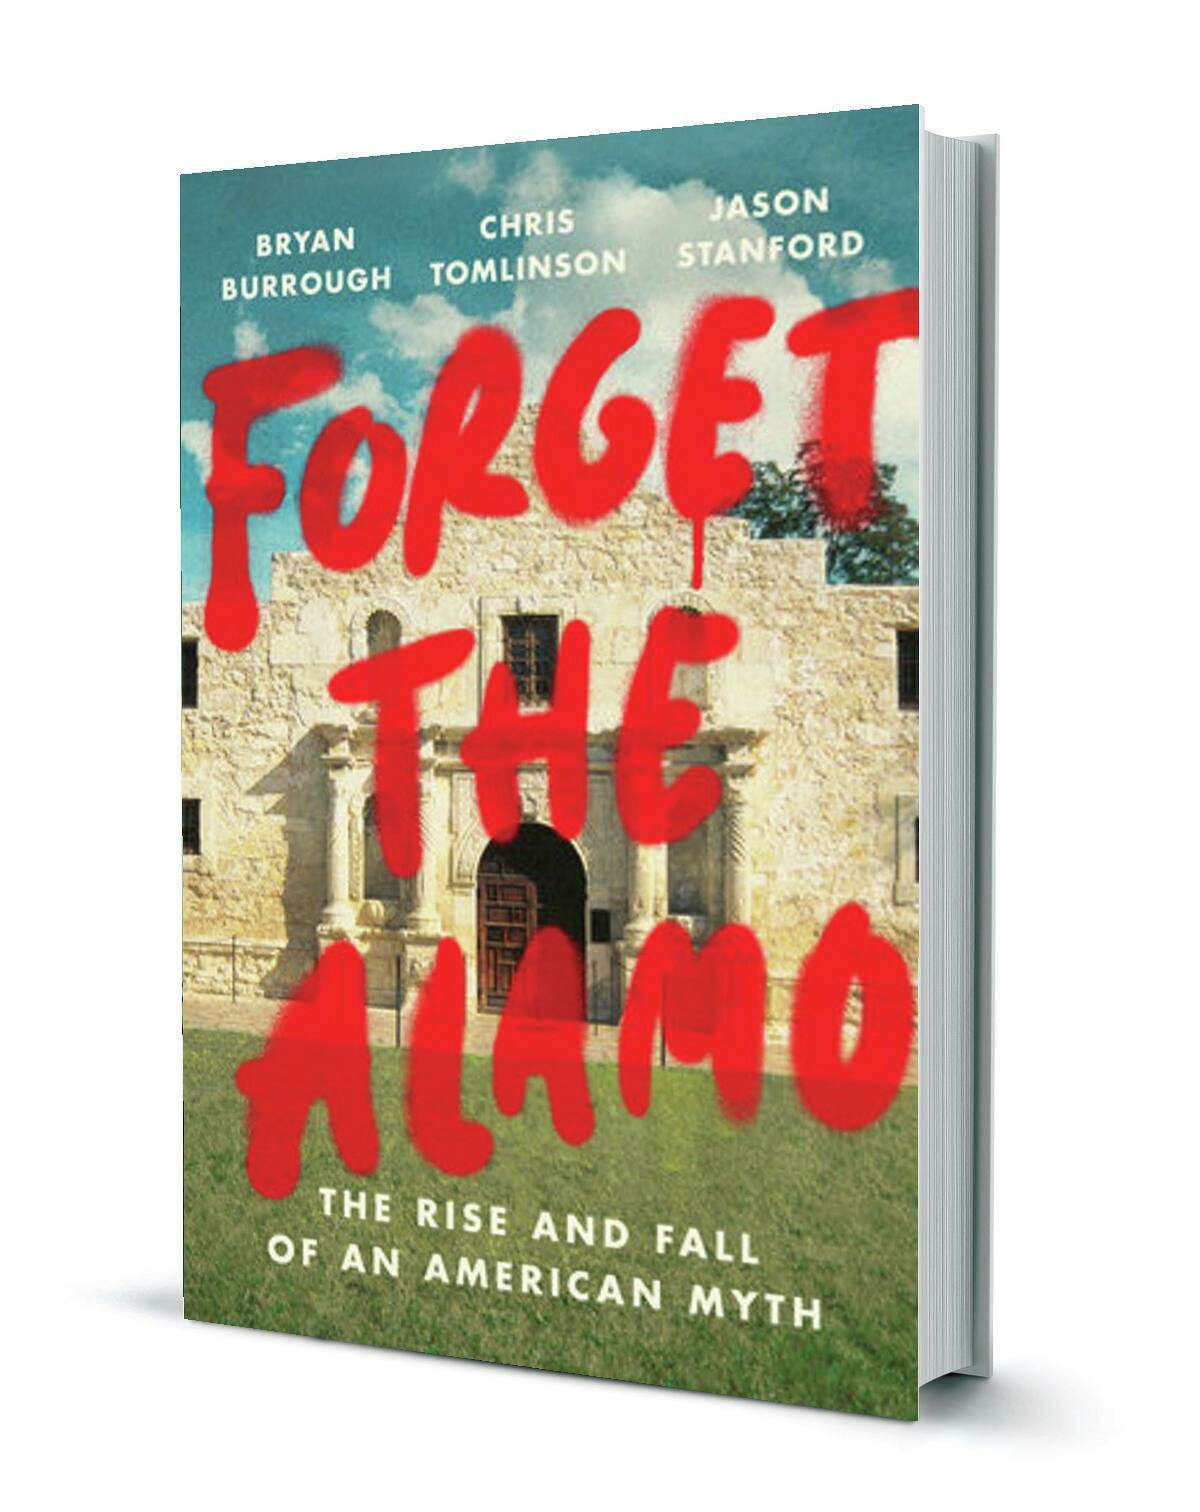 Forget the Alamo: The Rise and Fall of an American Myth Hardcover - June 8, 2021, by Bryan Burrough, Chris Tomlinson, Jason Stanford has stirred passions.